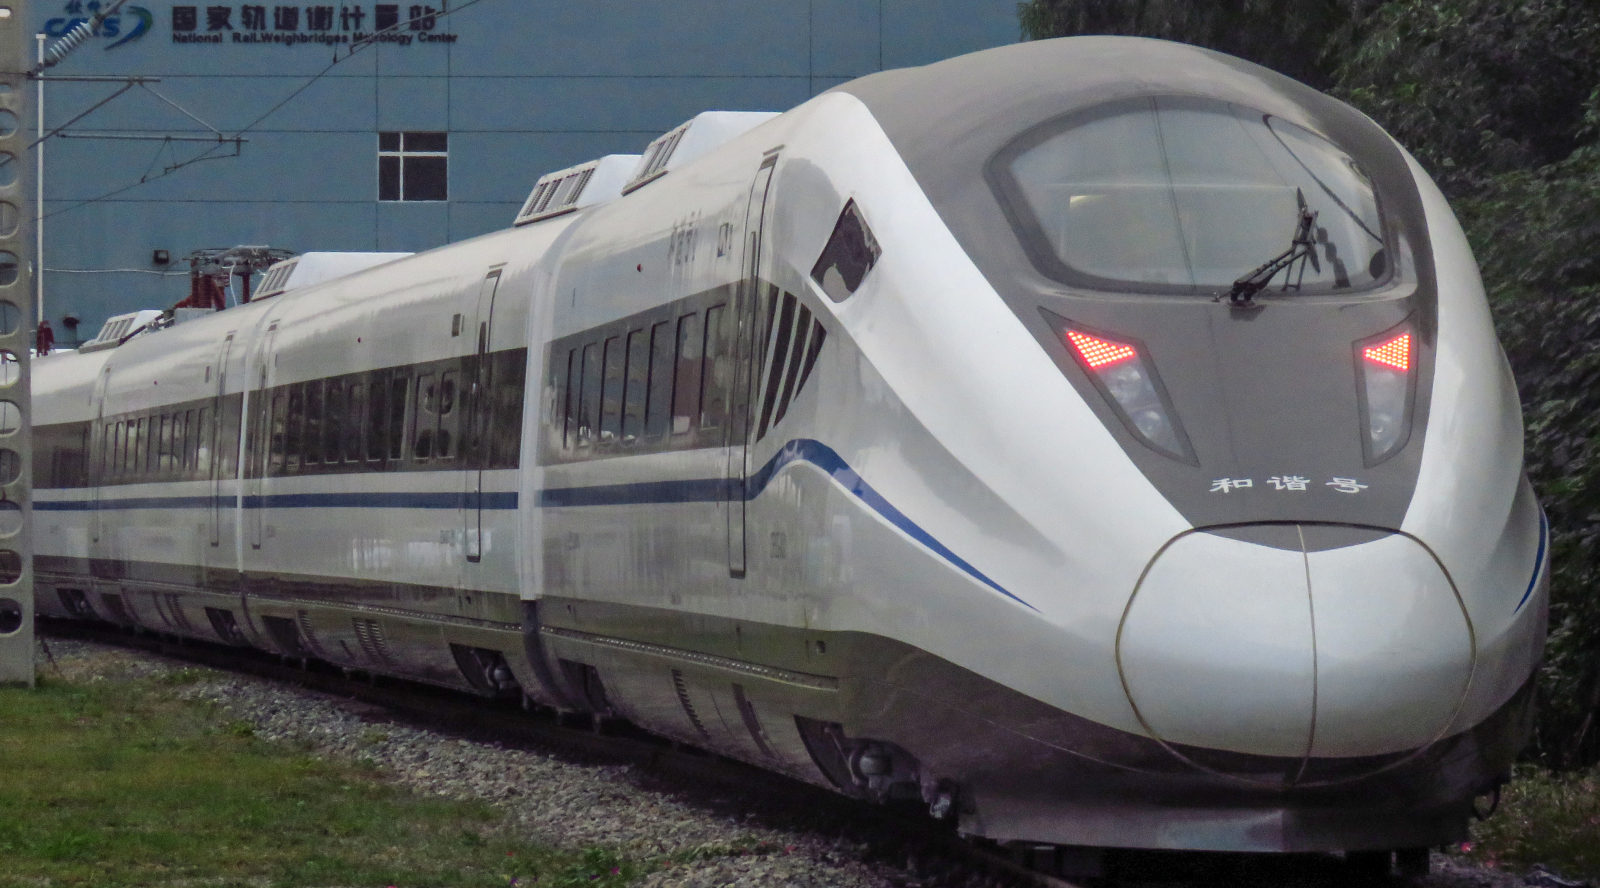 CRH2G with a new head shape